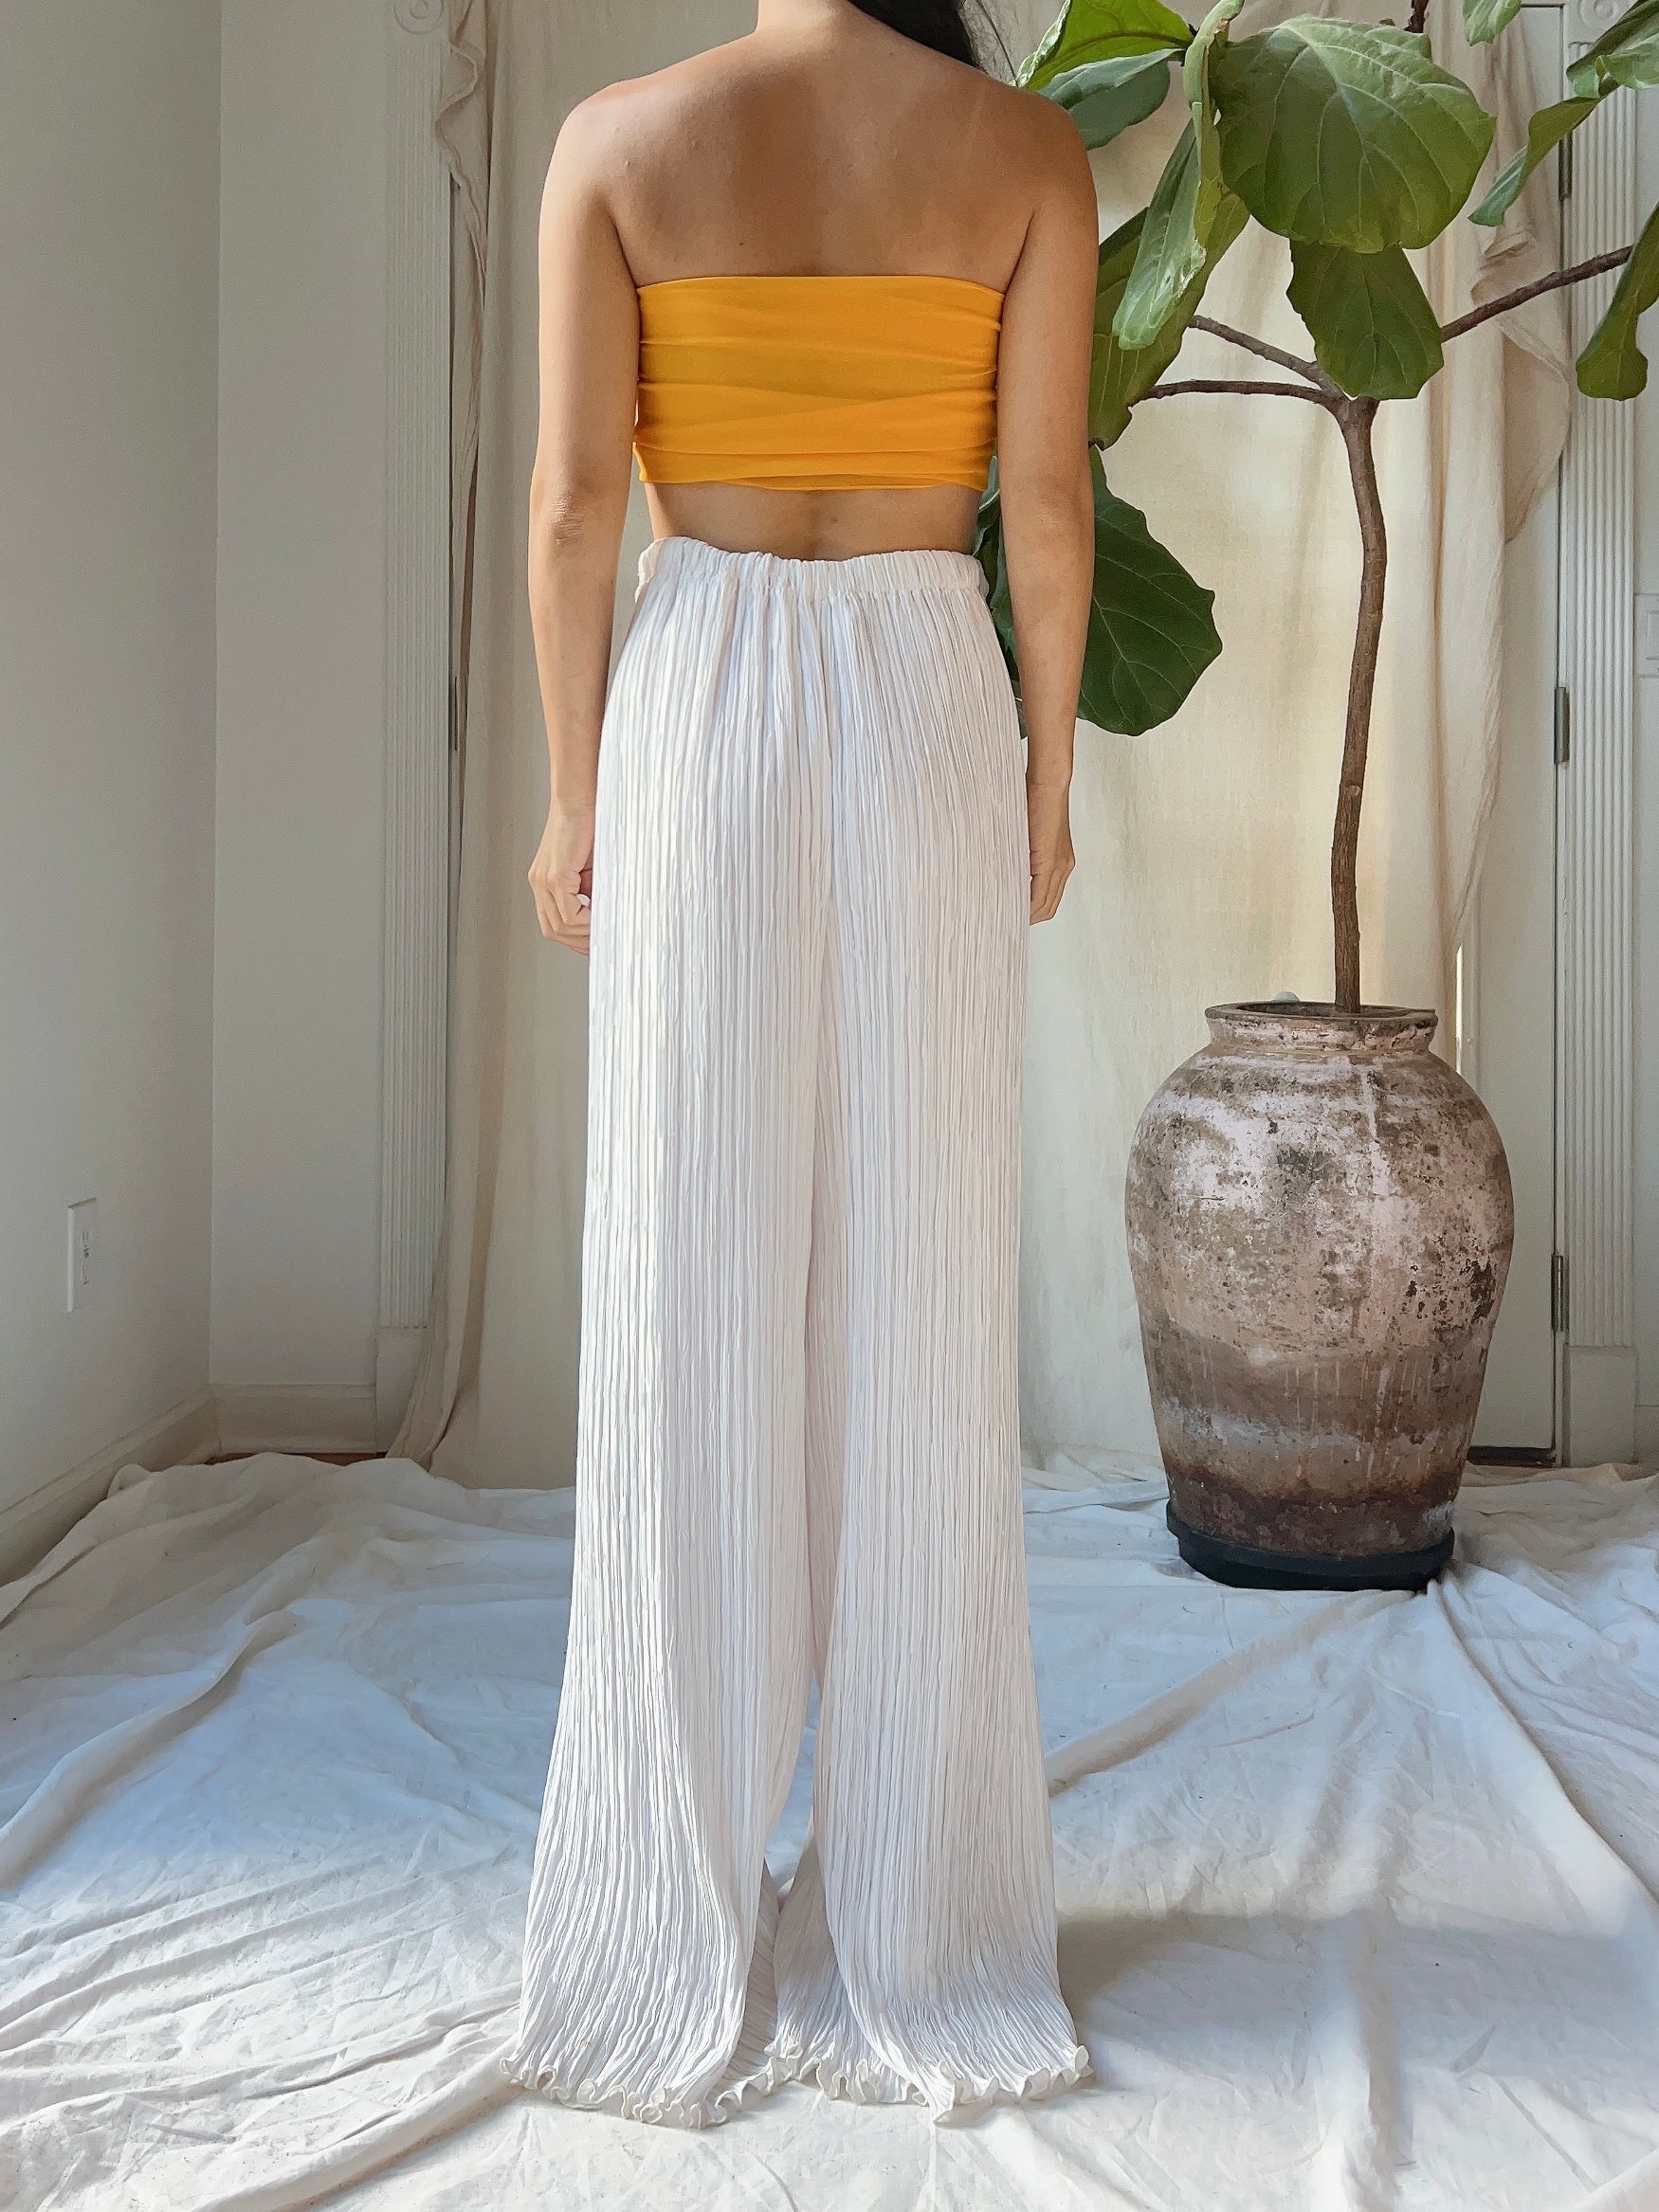 Vintage Mary McFadden Pleated Trousers - M/L